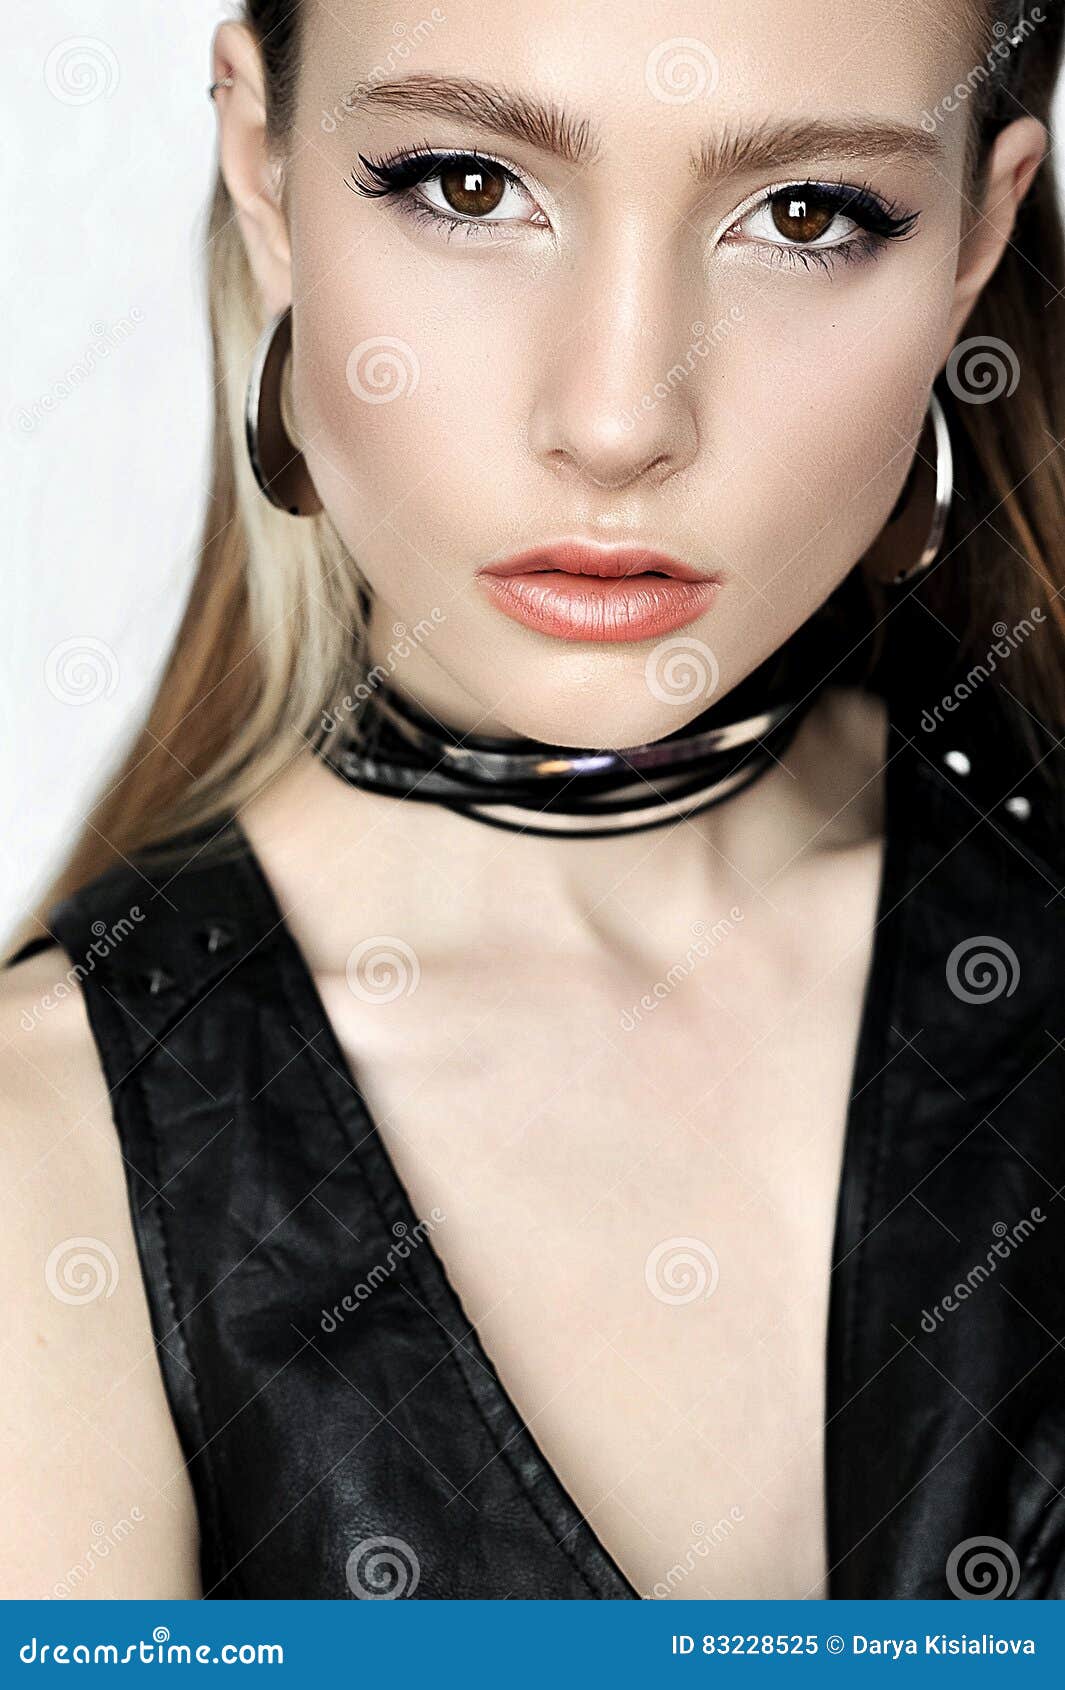 Punk Rock Style Fashion Woman Model Face With Glamour Makeup